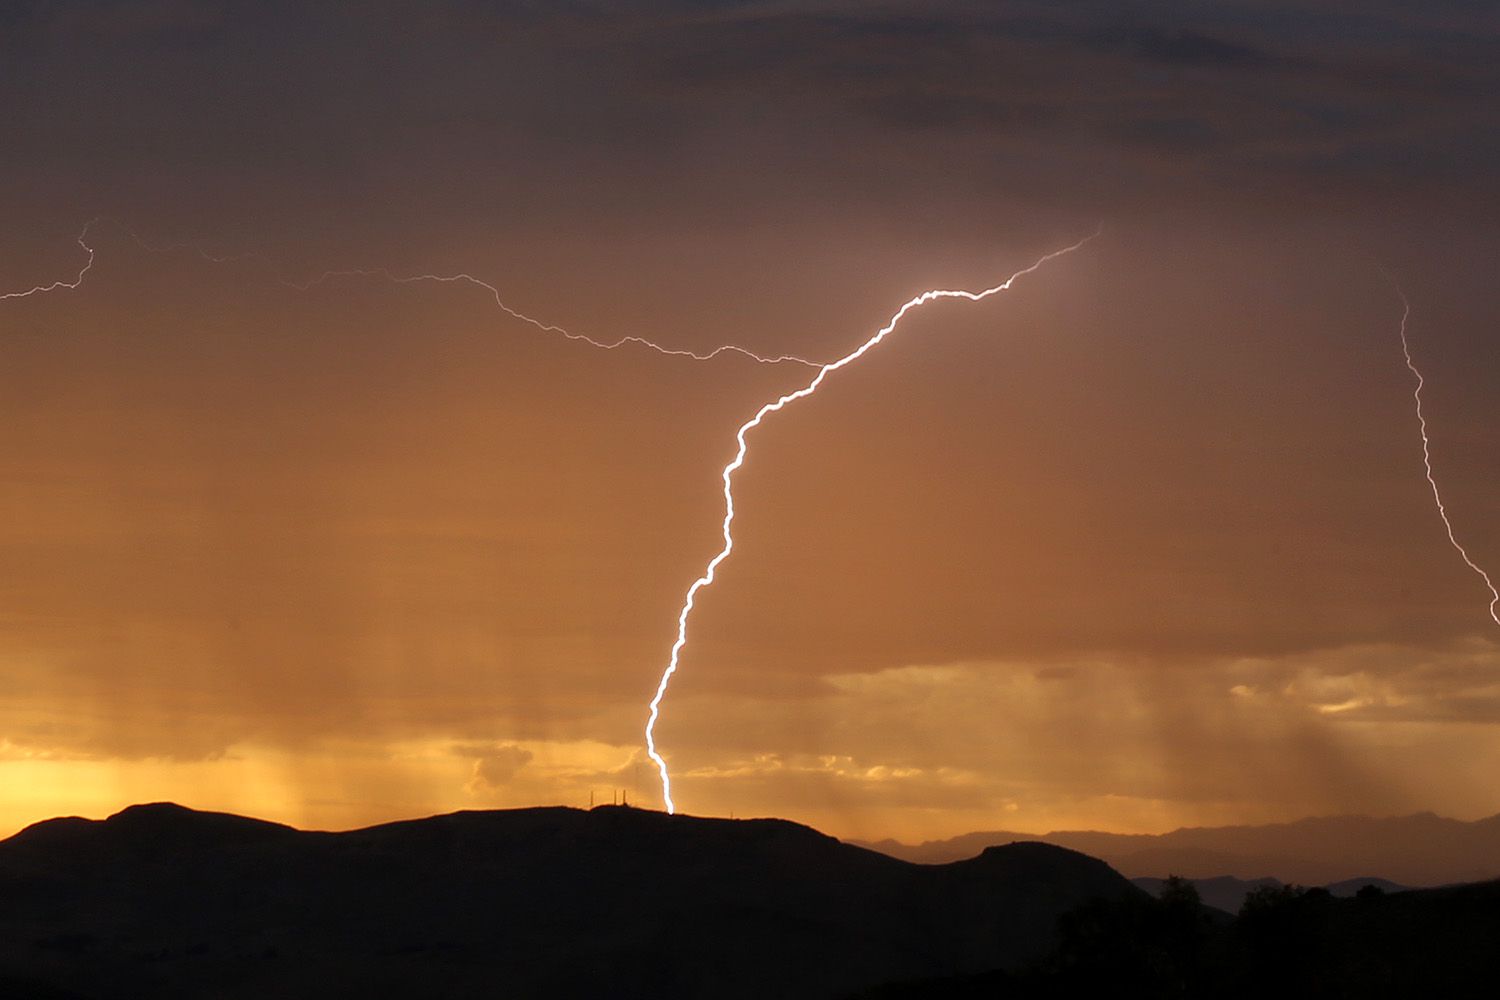 Lighting strikes to the West over the Oxnard plain as seen from Thousand Oaks as rain, thunder and lightning hit the southland by surprise Monday October 4, 2021